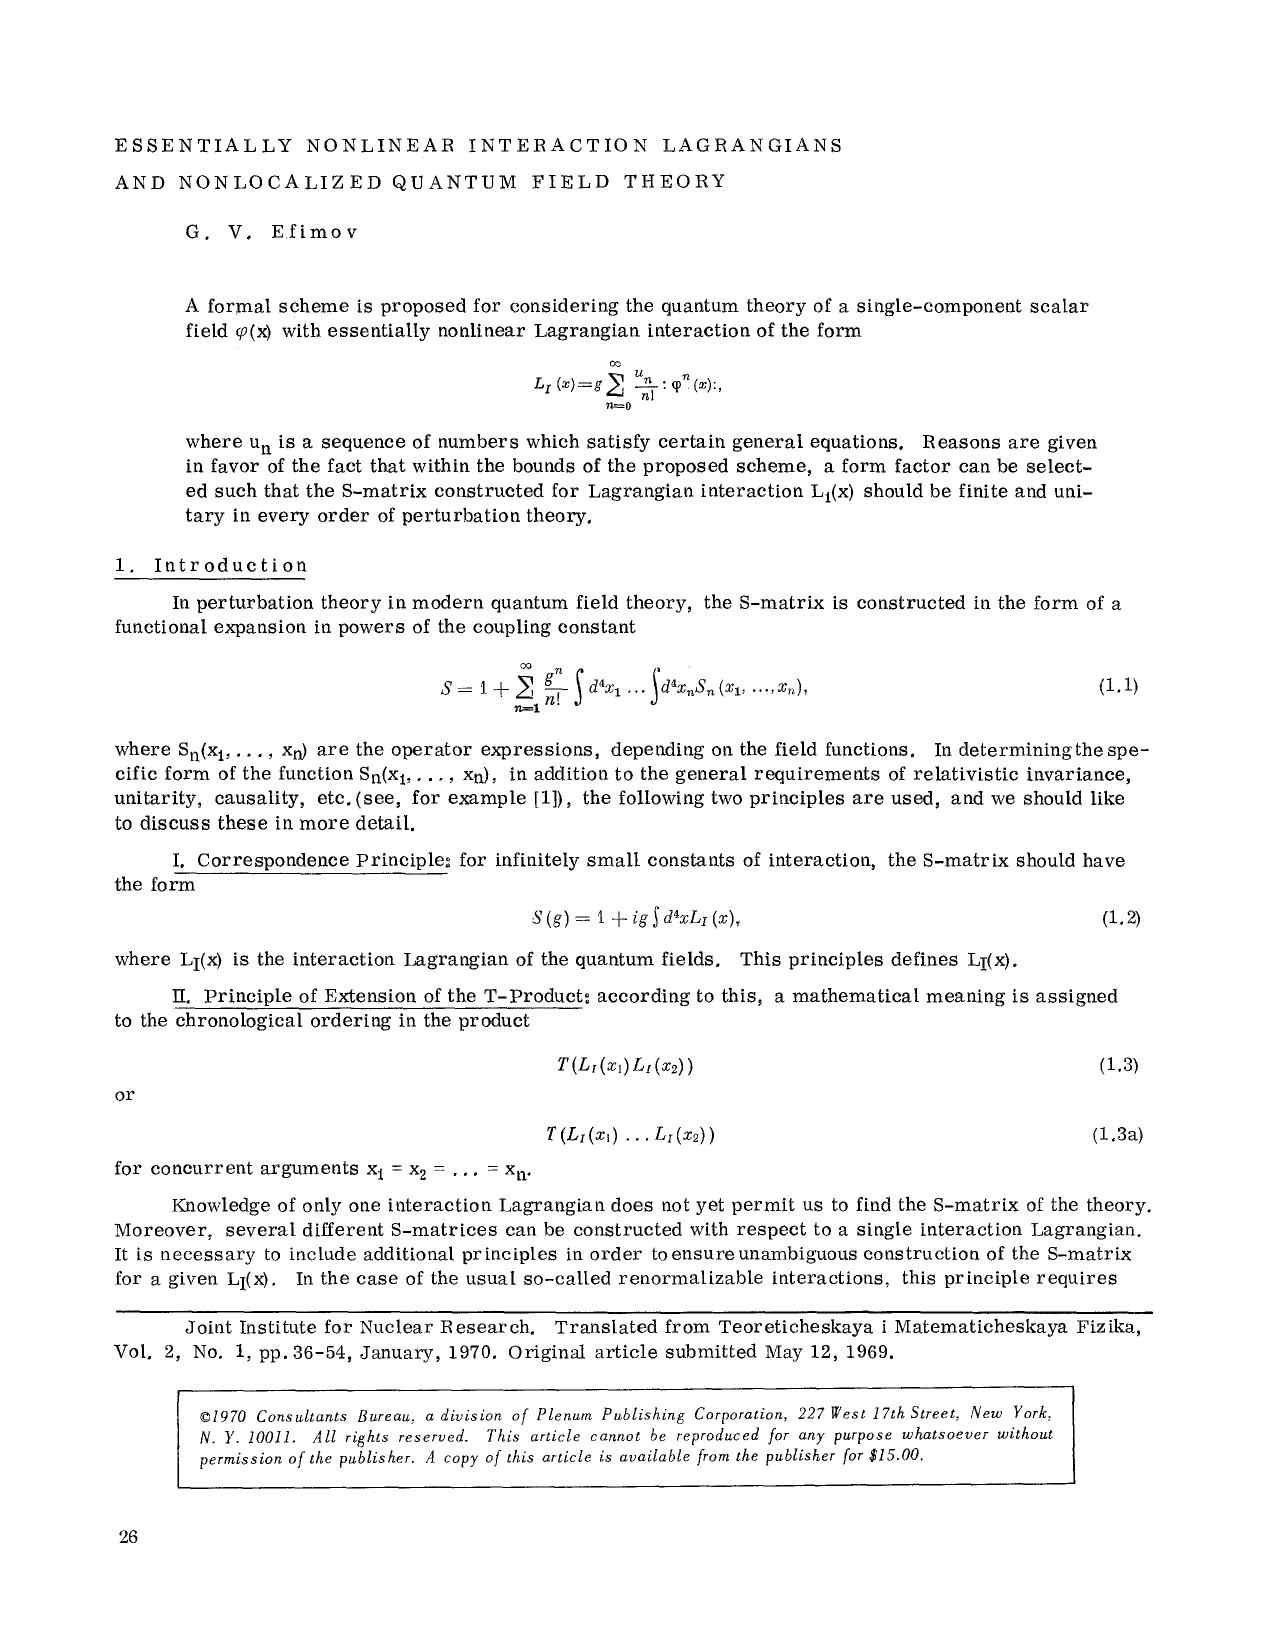 Essentially nonlinear interaction Lagrangians and nonlocalized quantum field theory by Unknown